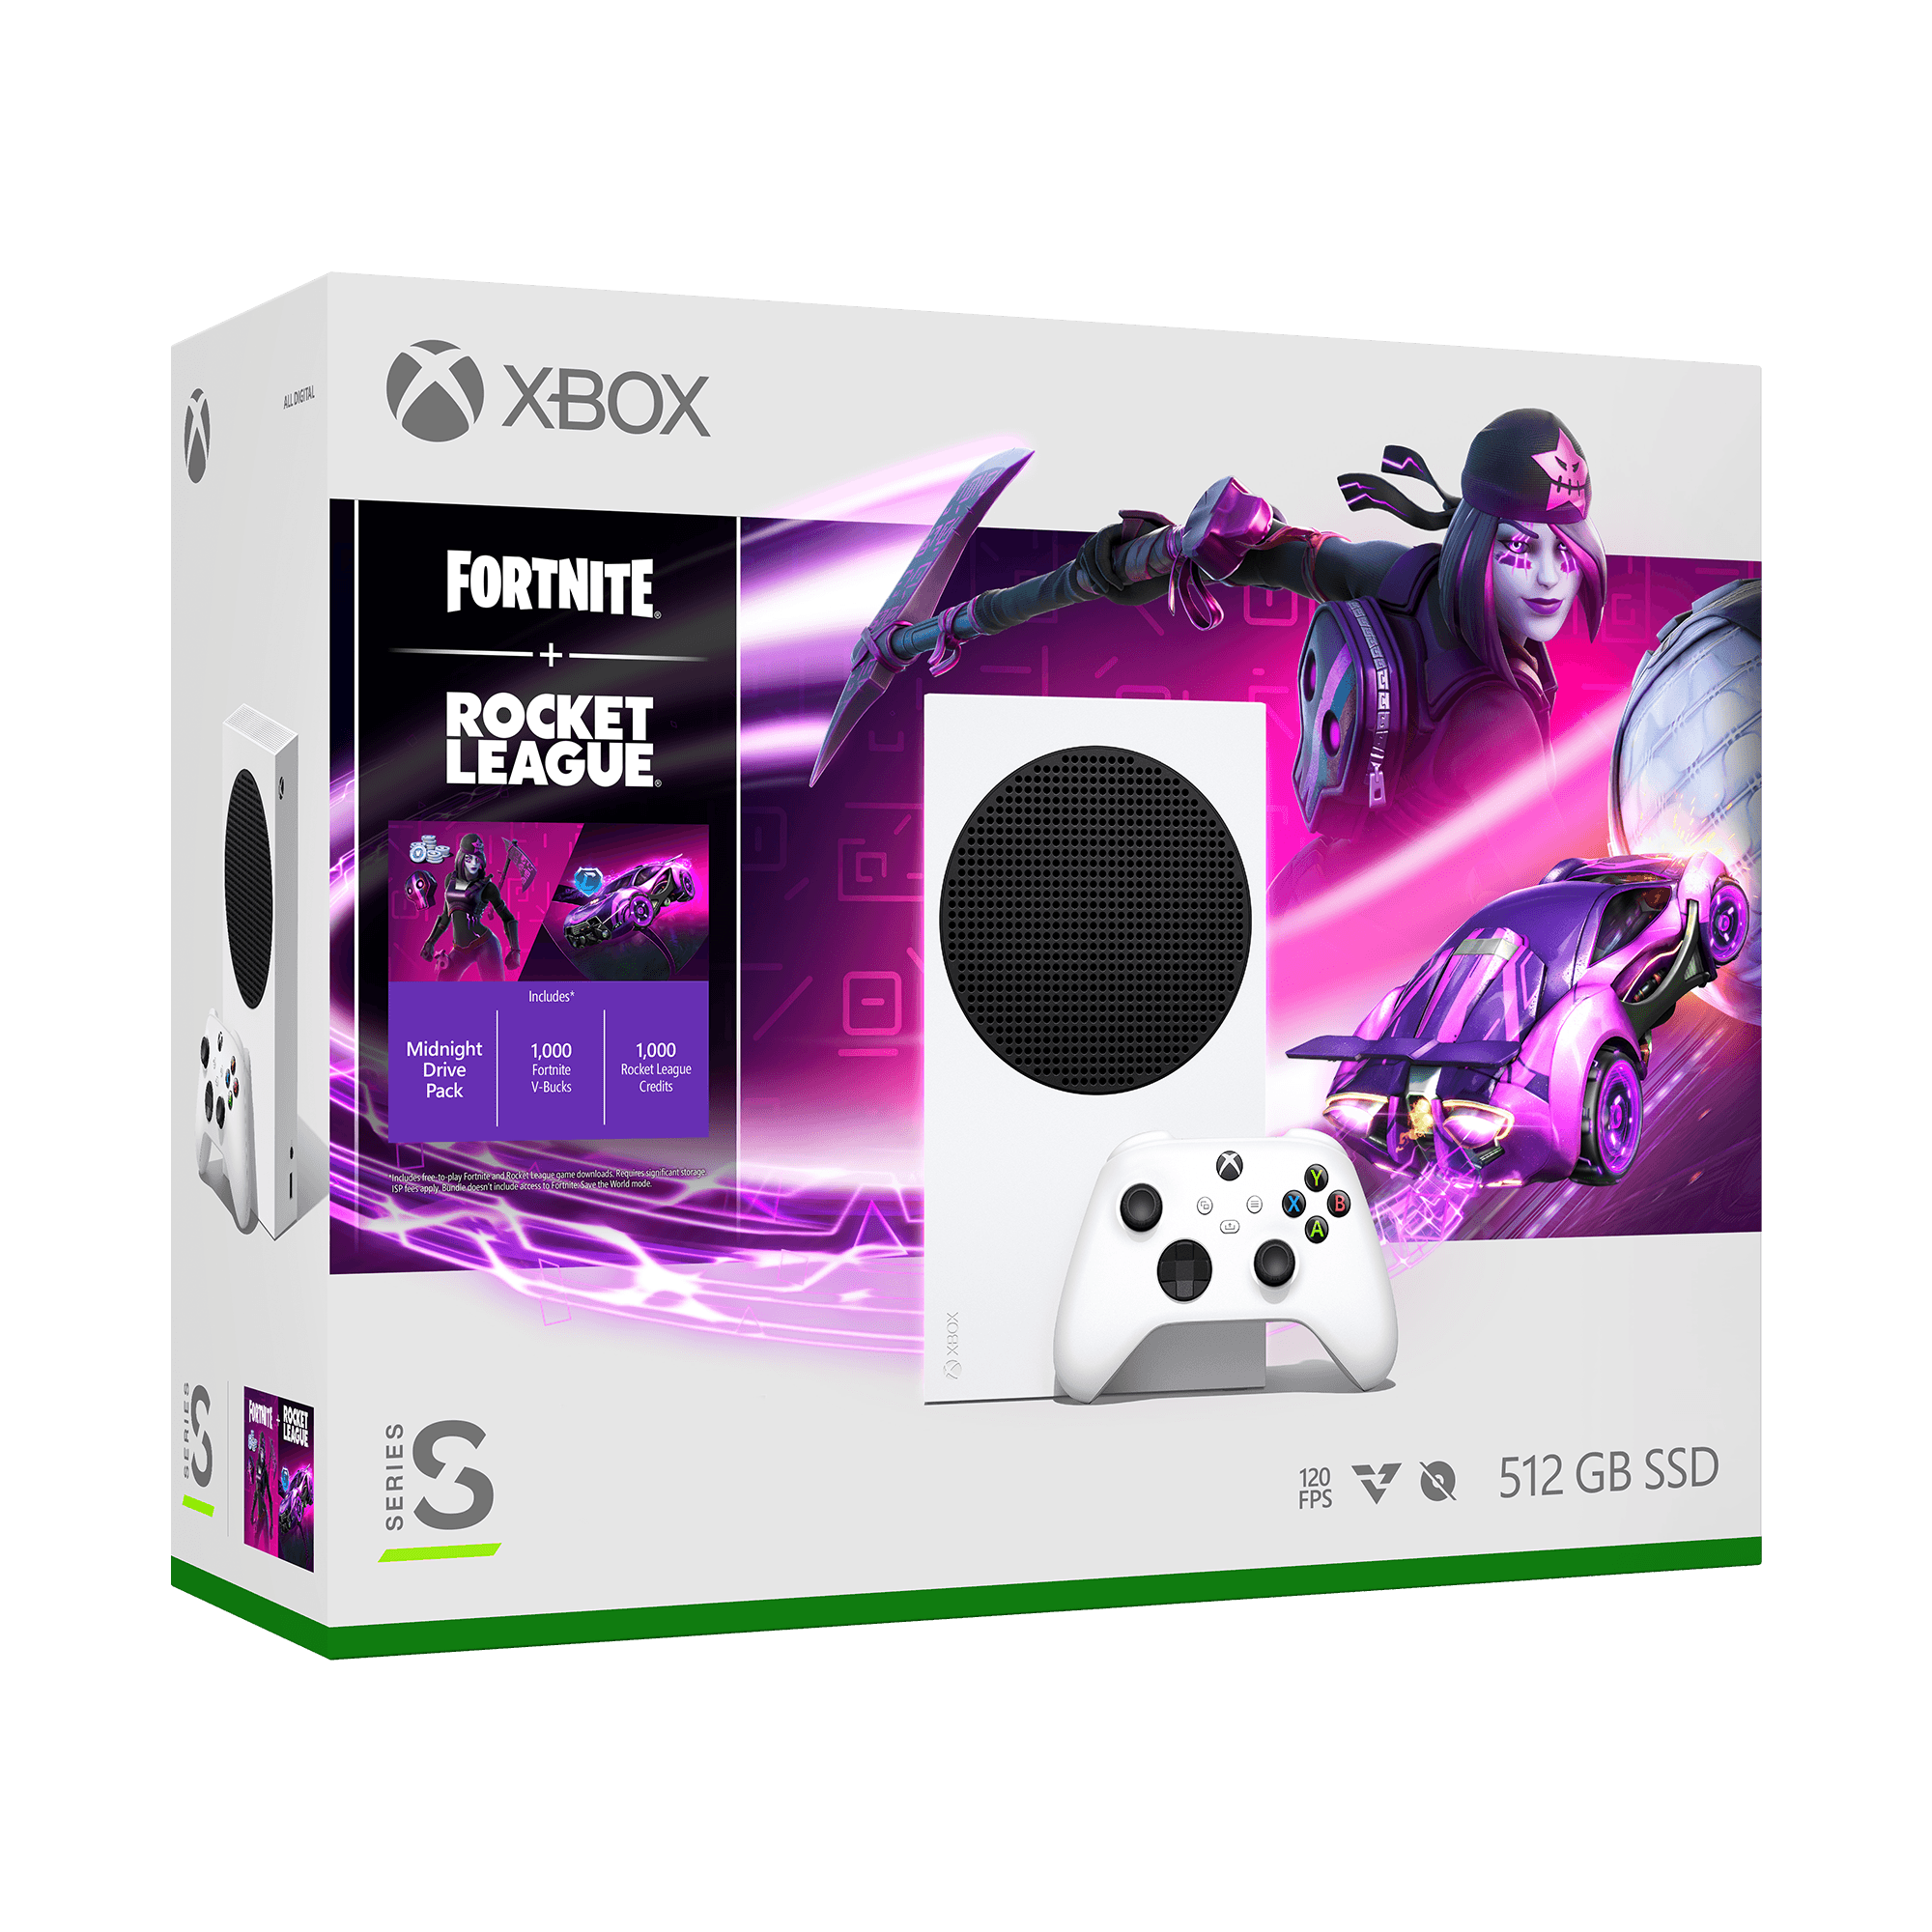 Armstrong Hambre Acercarse Pack Xbox Series S – Fortnite & Rocket League